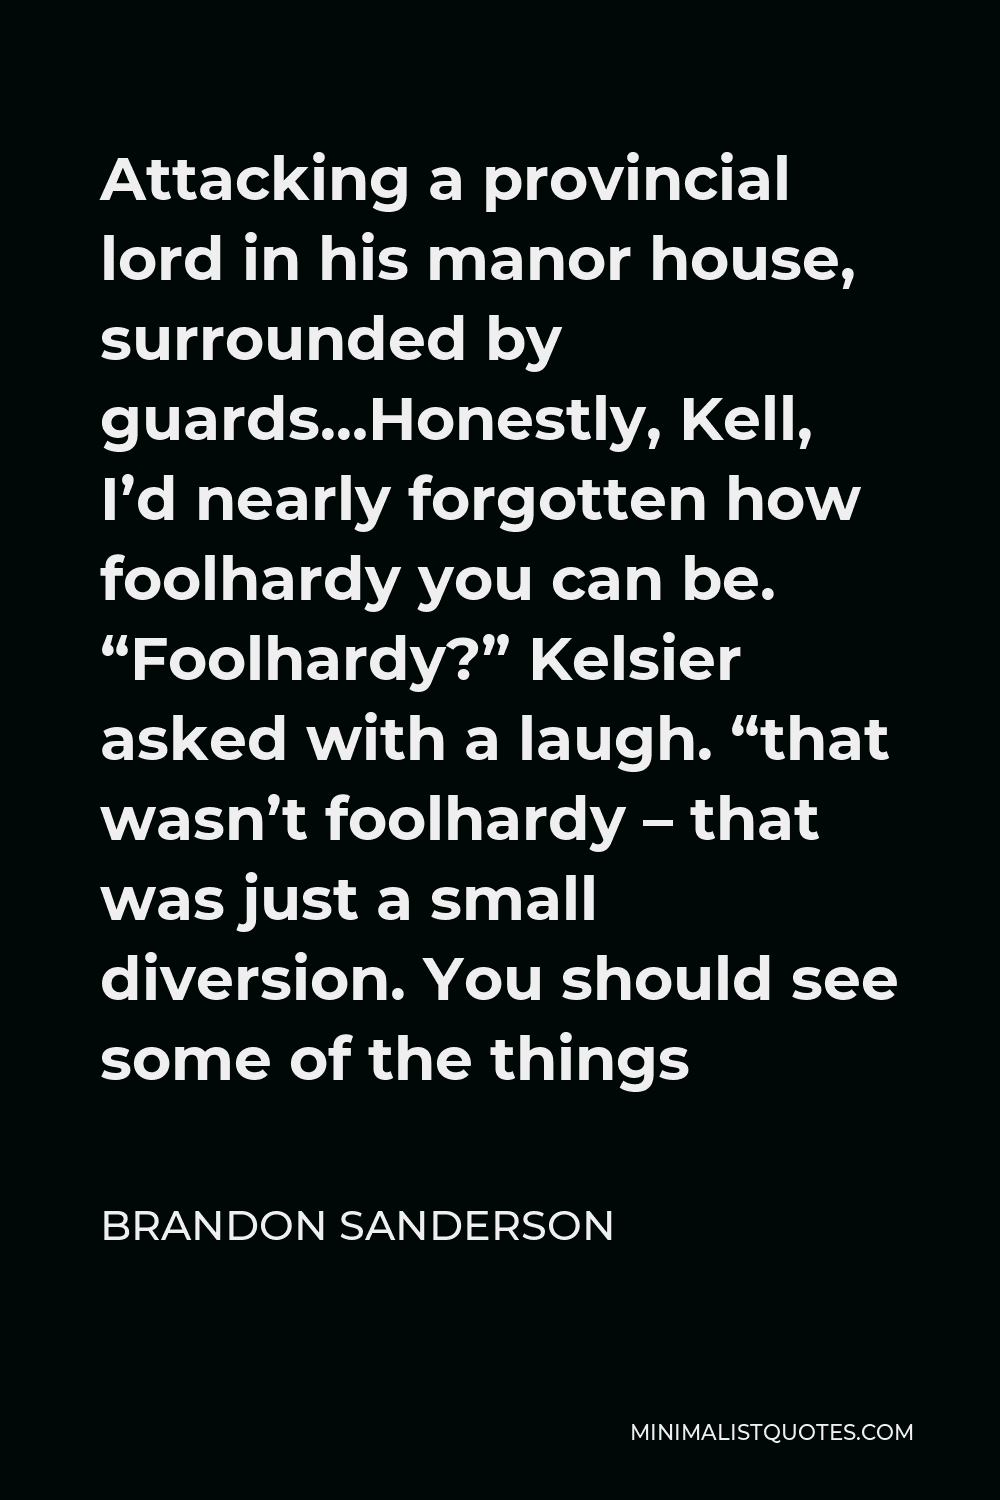 Brandon Sanderson Quote - Attacking a provincial lord in his manor house, surrounded by guards…Honestly, Kell, I’d nearly forgotten how foolhardy you can be. “Foolhardy?” Kelsier asked with a laugh. “that wasn’t foolhardy – that was just a small diversion. You should see some of the things